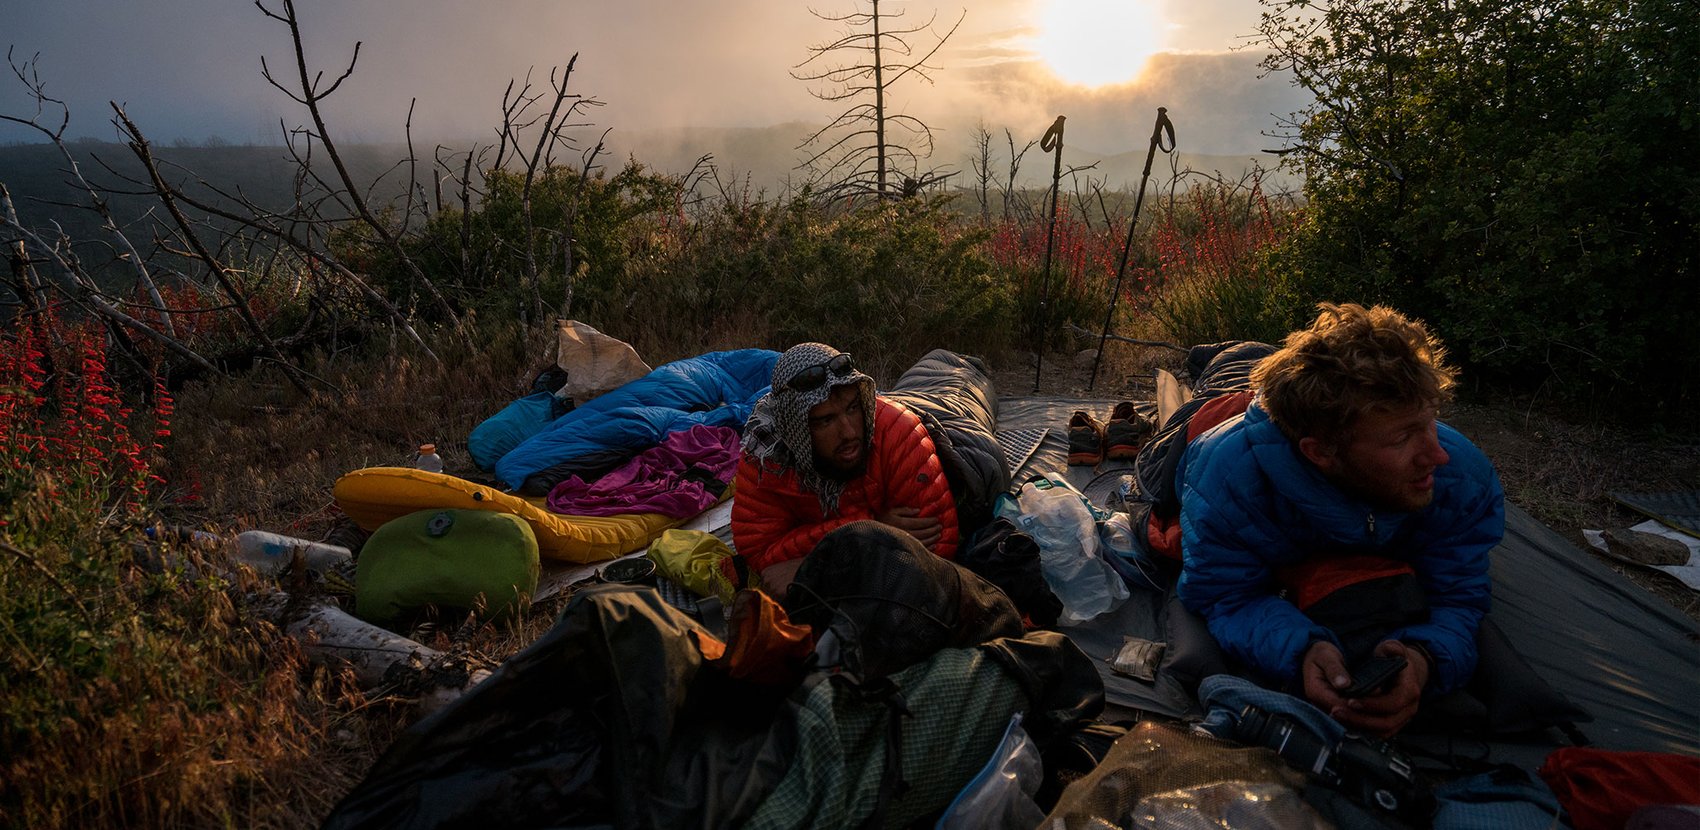 A group of people sitting on the ground in their sleeping bags.